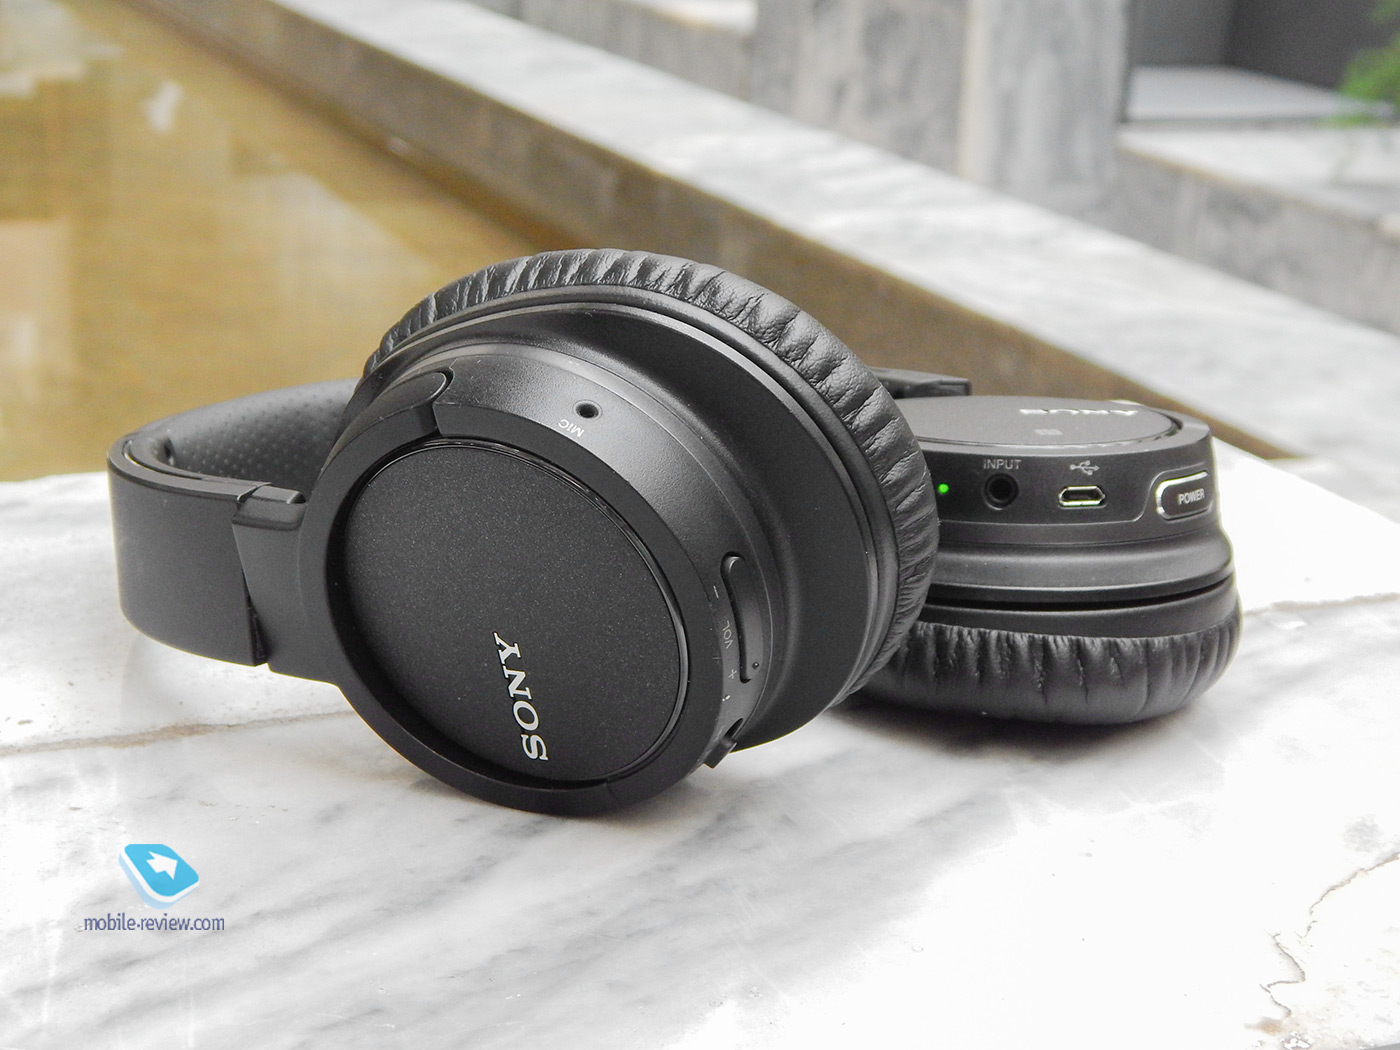         .   Sony MDR-ZX780DC